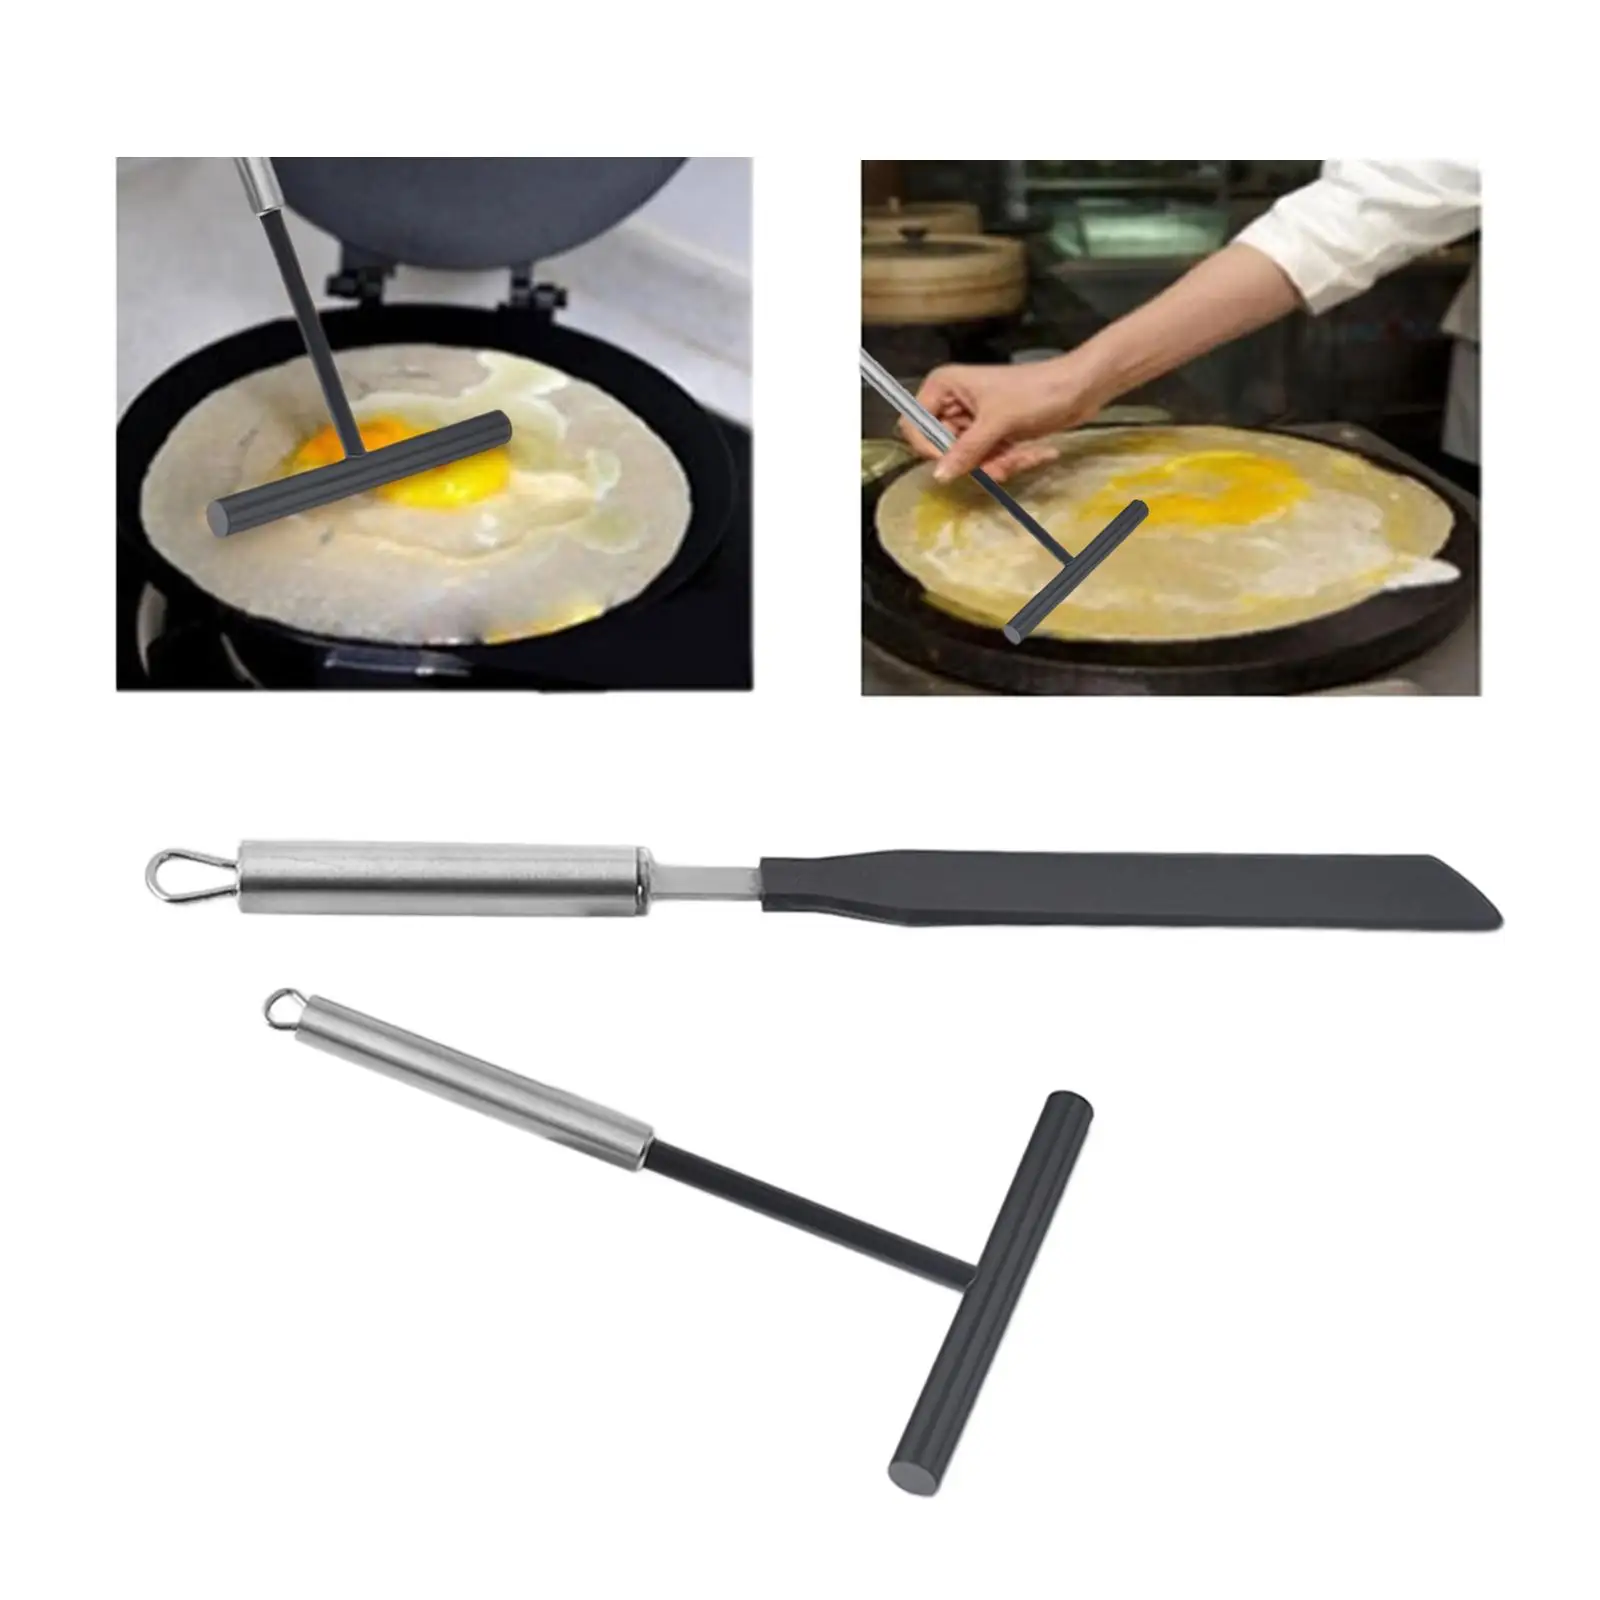 2Pcs Crepe Spreader and Spatula Set Kitchen Gadgets Pancake Cooking Tools T Shaped Pastry Tool Cookware for Restaurant Kitchen